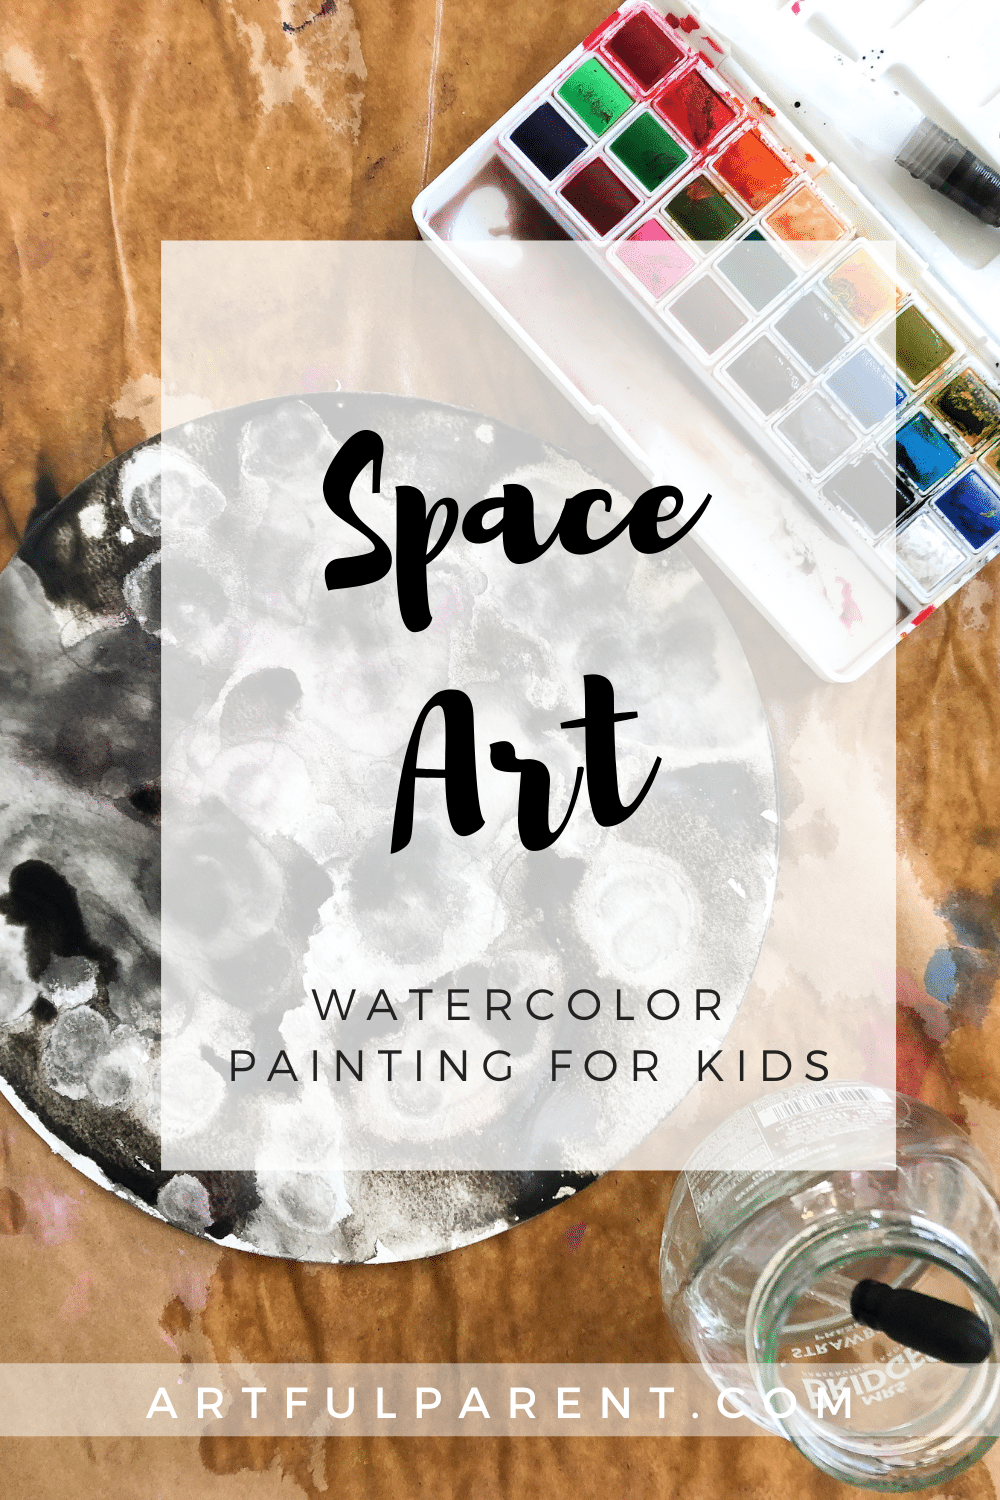 3 Watercolor Painting Ideas about Space